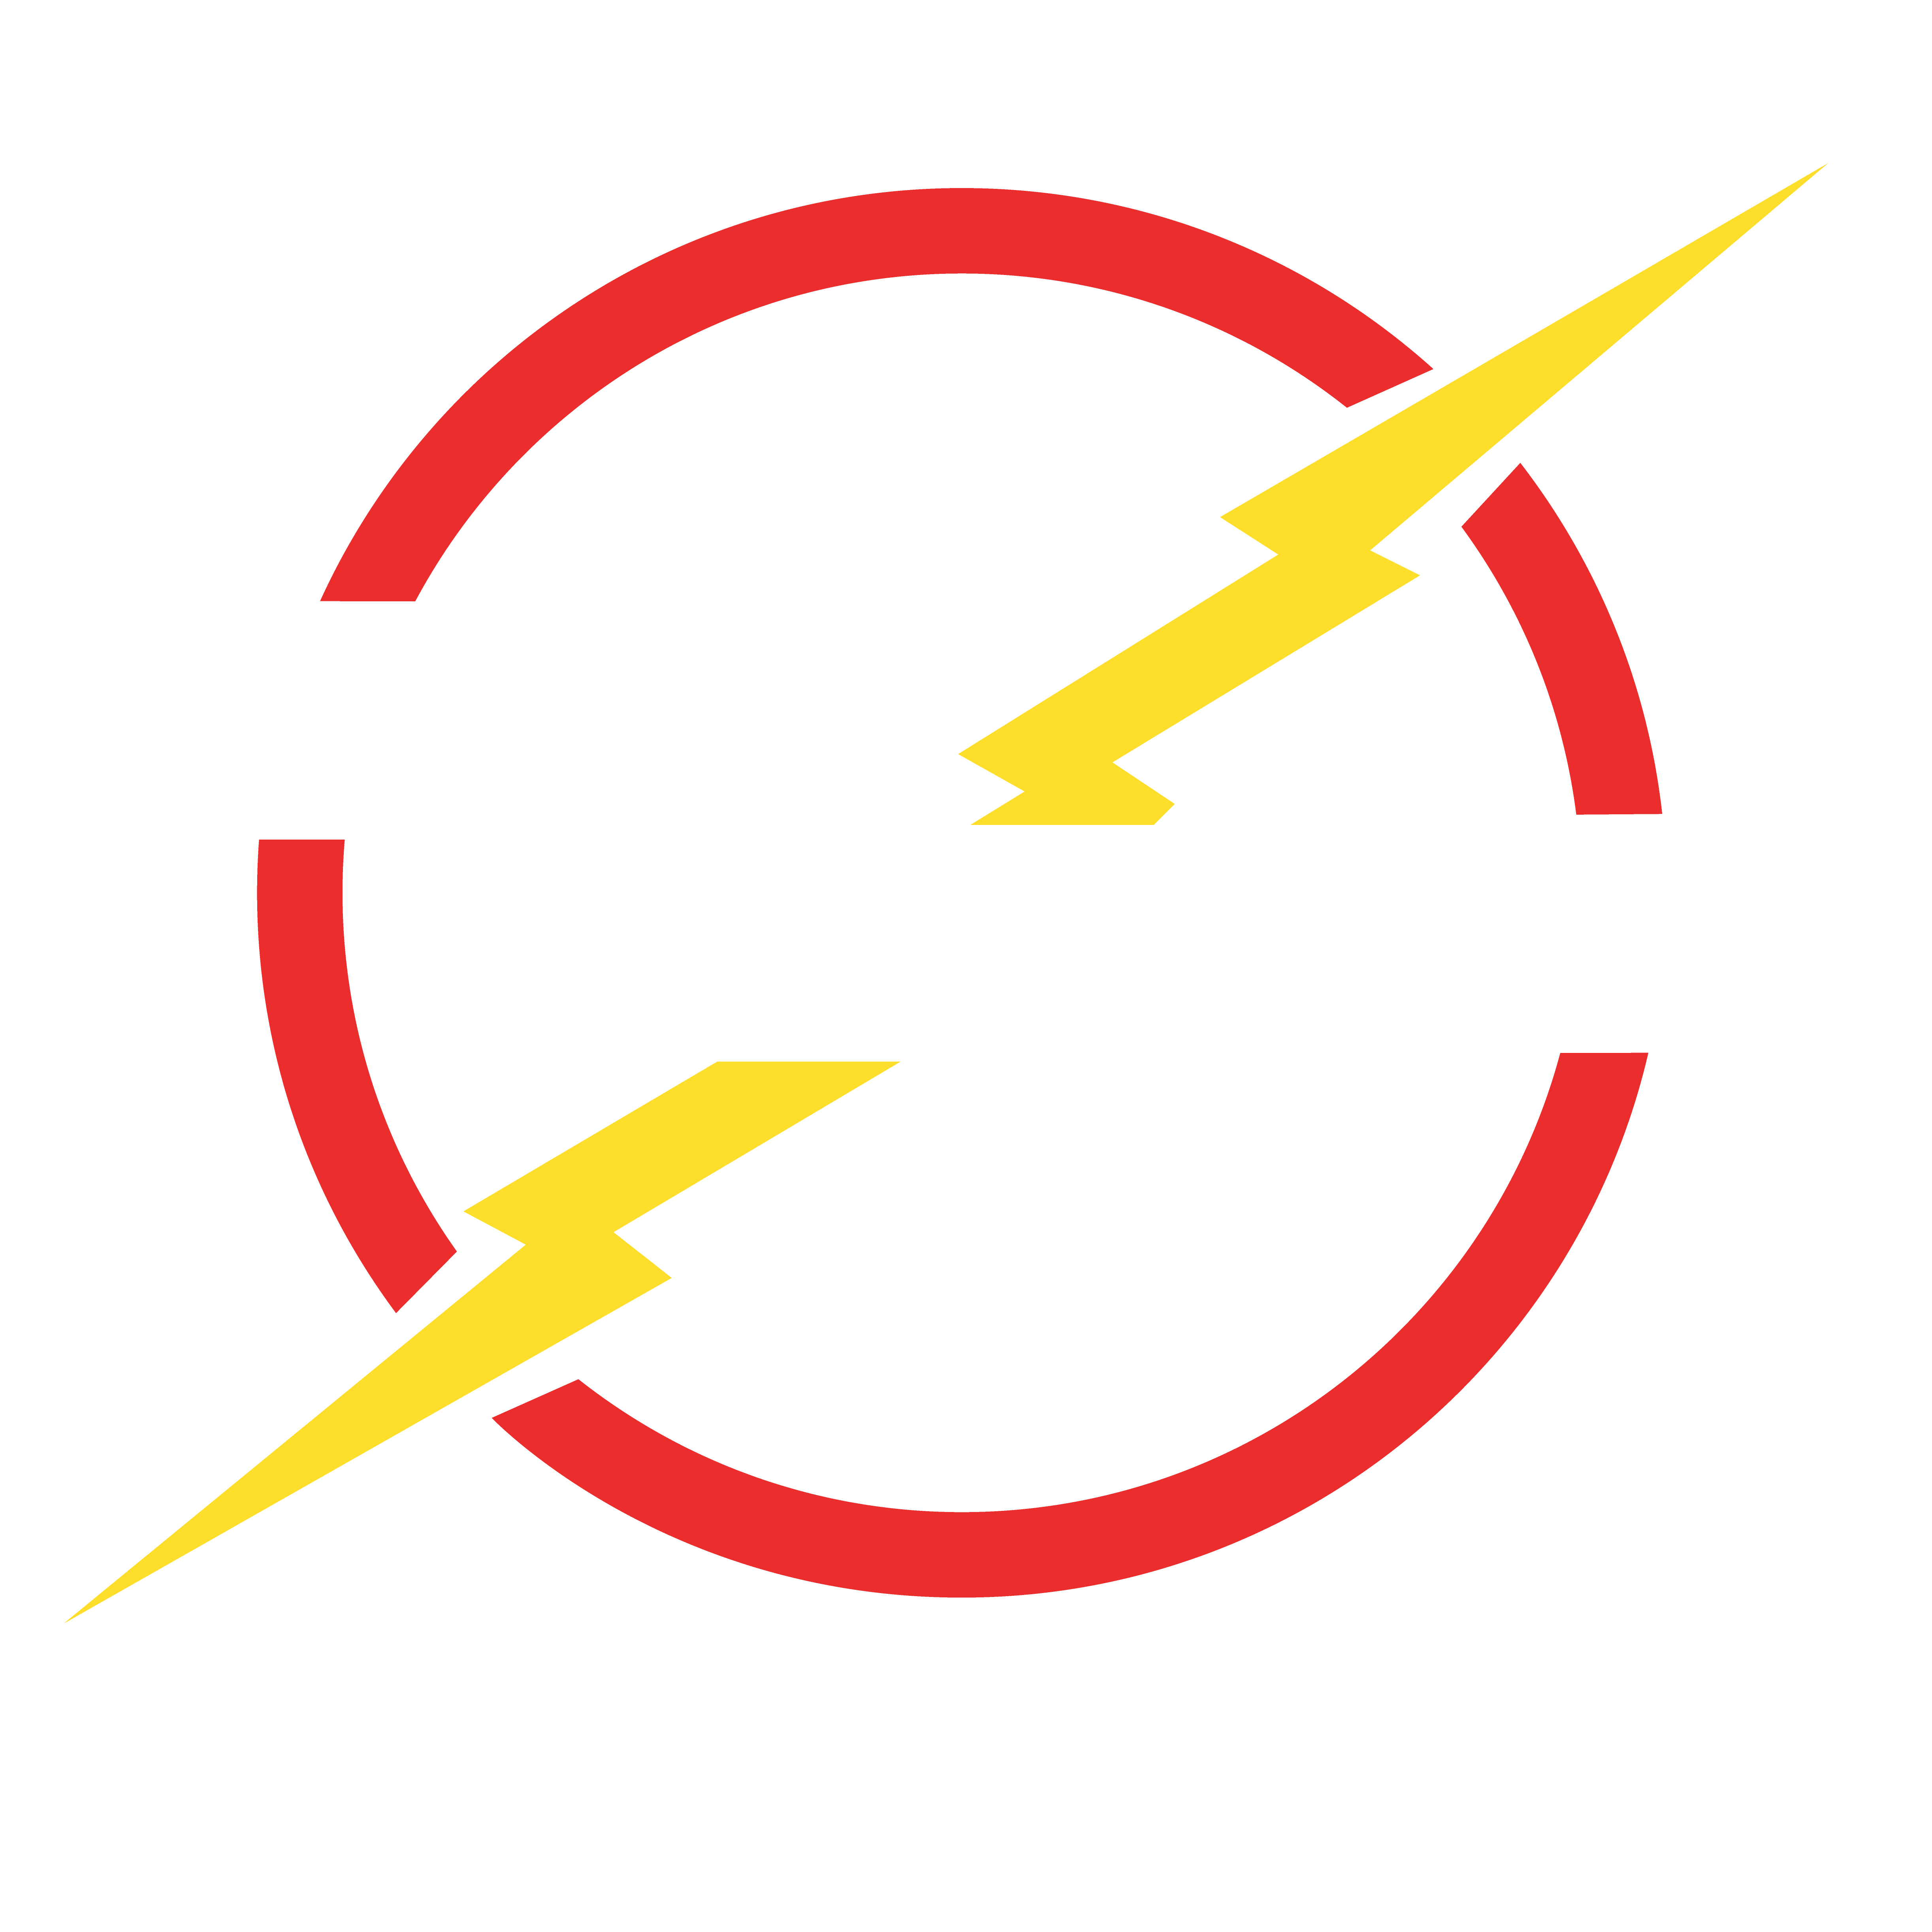 lightning clipart electrical power symbol